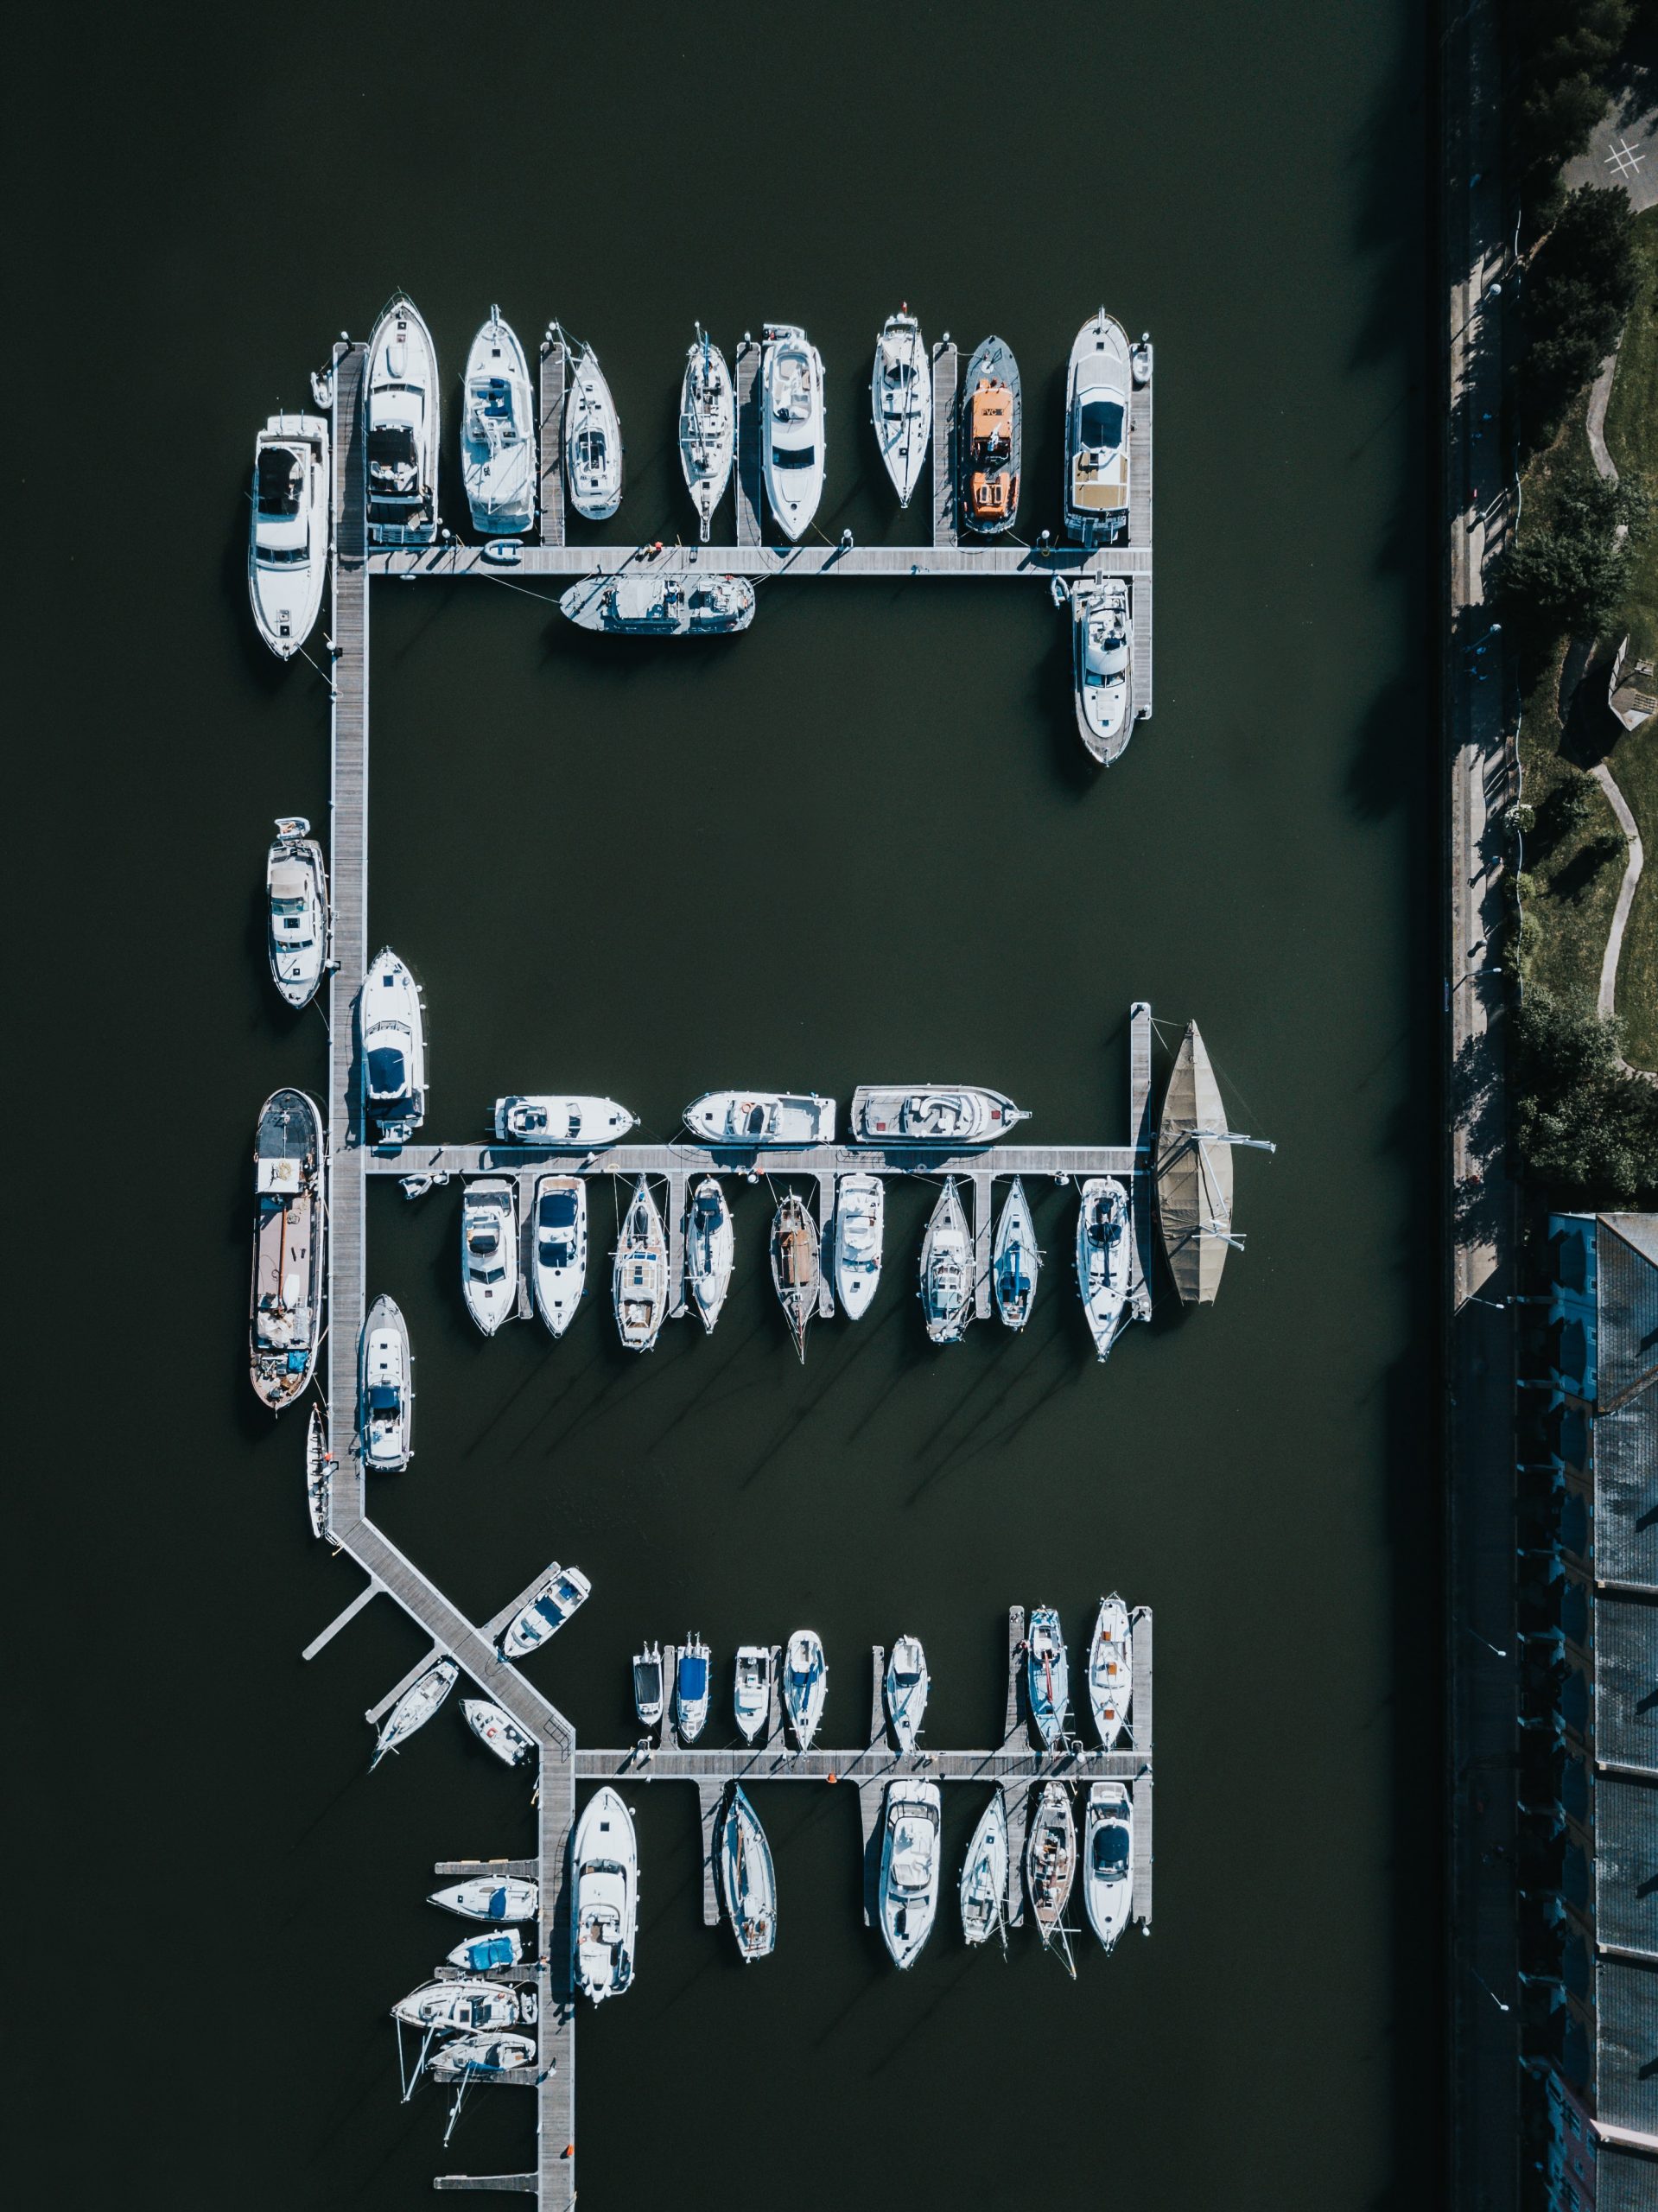 The Portishead Quay Marina as seen from above